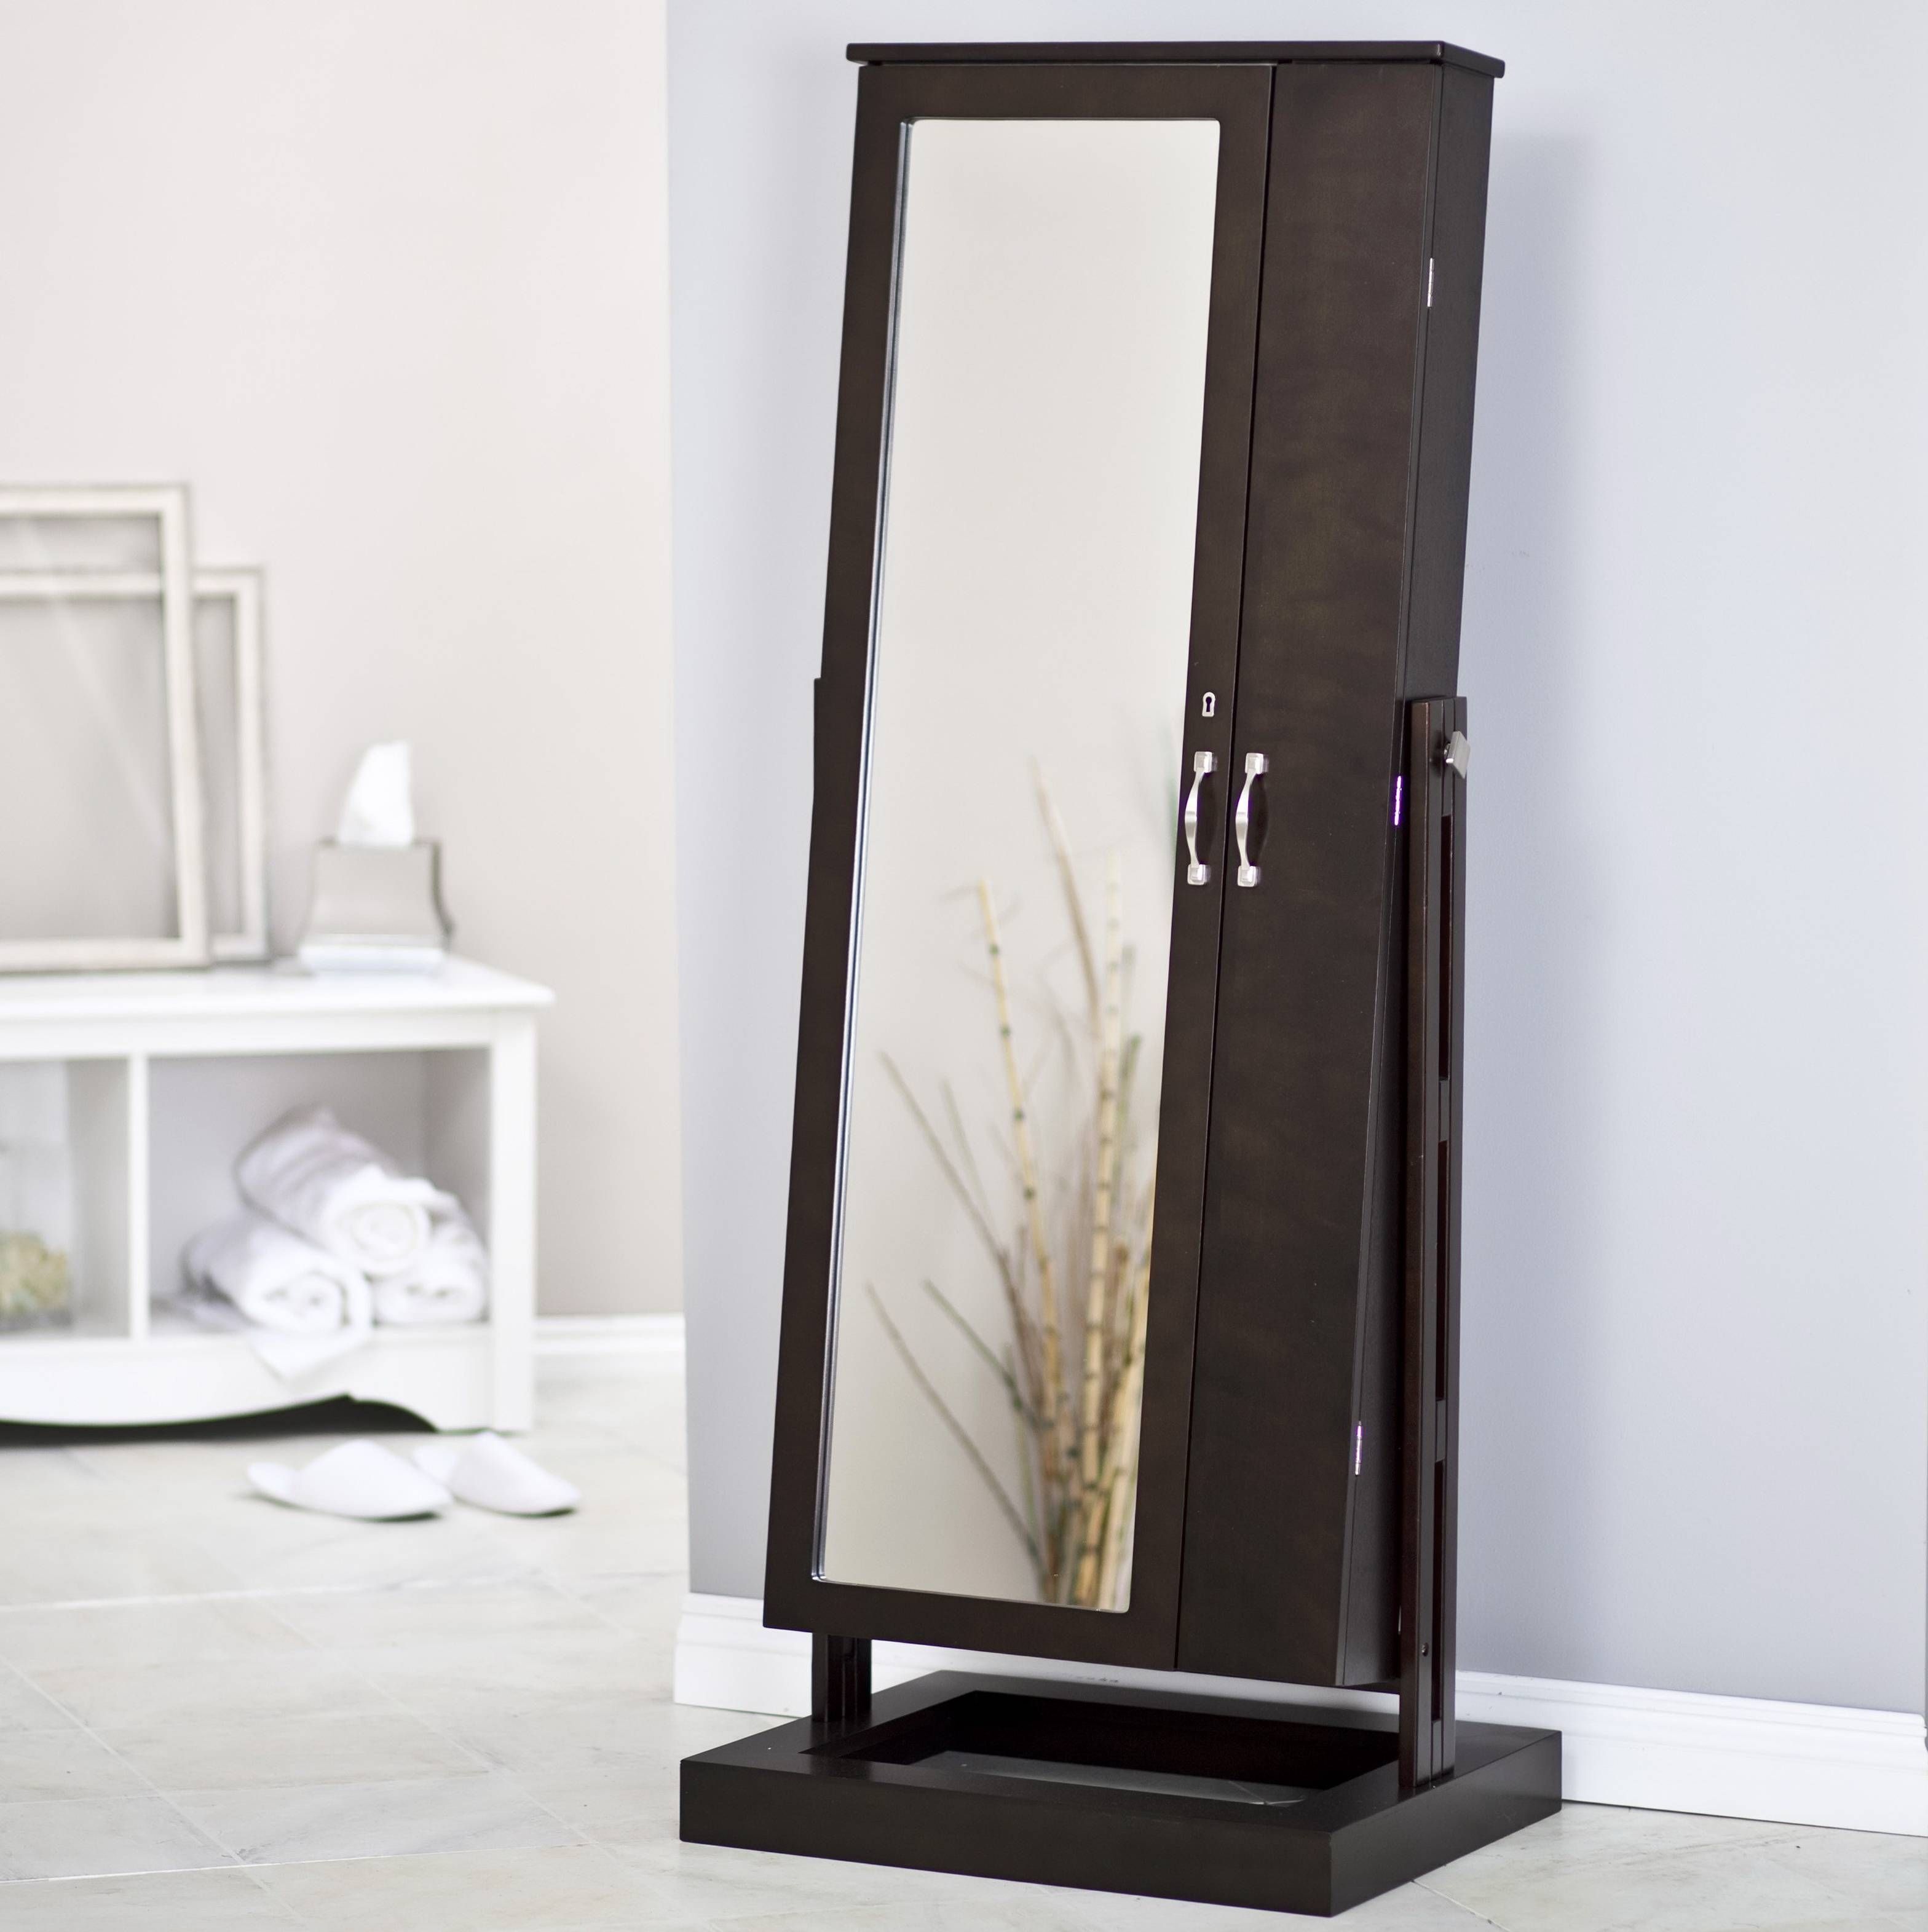 Trendy Jewelry Cabinet Mirror Free Standing 142 Free Standing Intended For Full Length Free Standing Mirrors With Drawer (View 12 of 25)